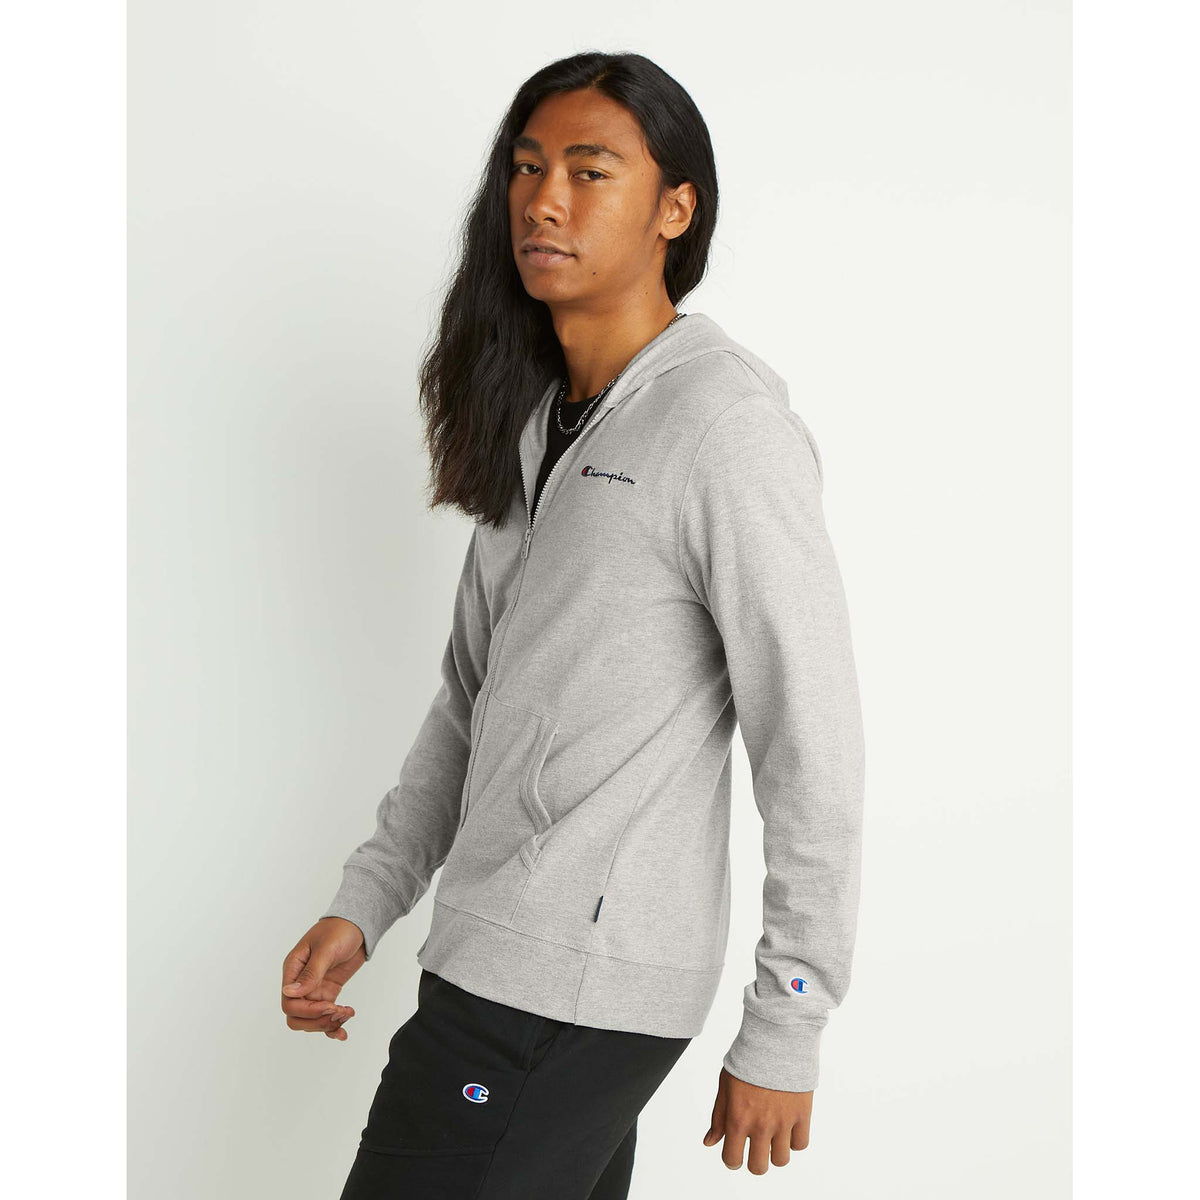 Champion Middleweight T-shirt Hoodie gris oxford homme zip